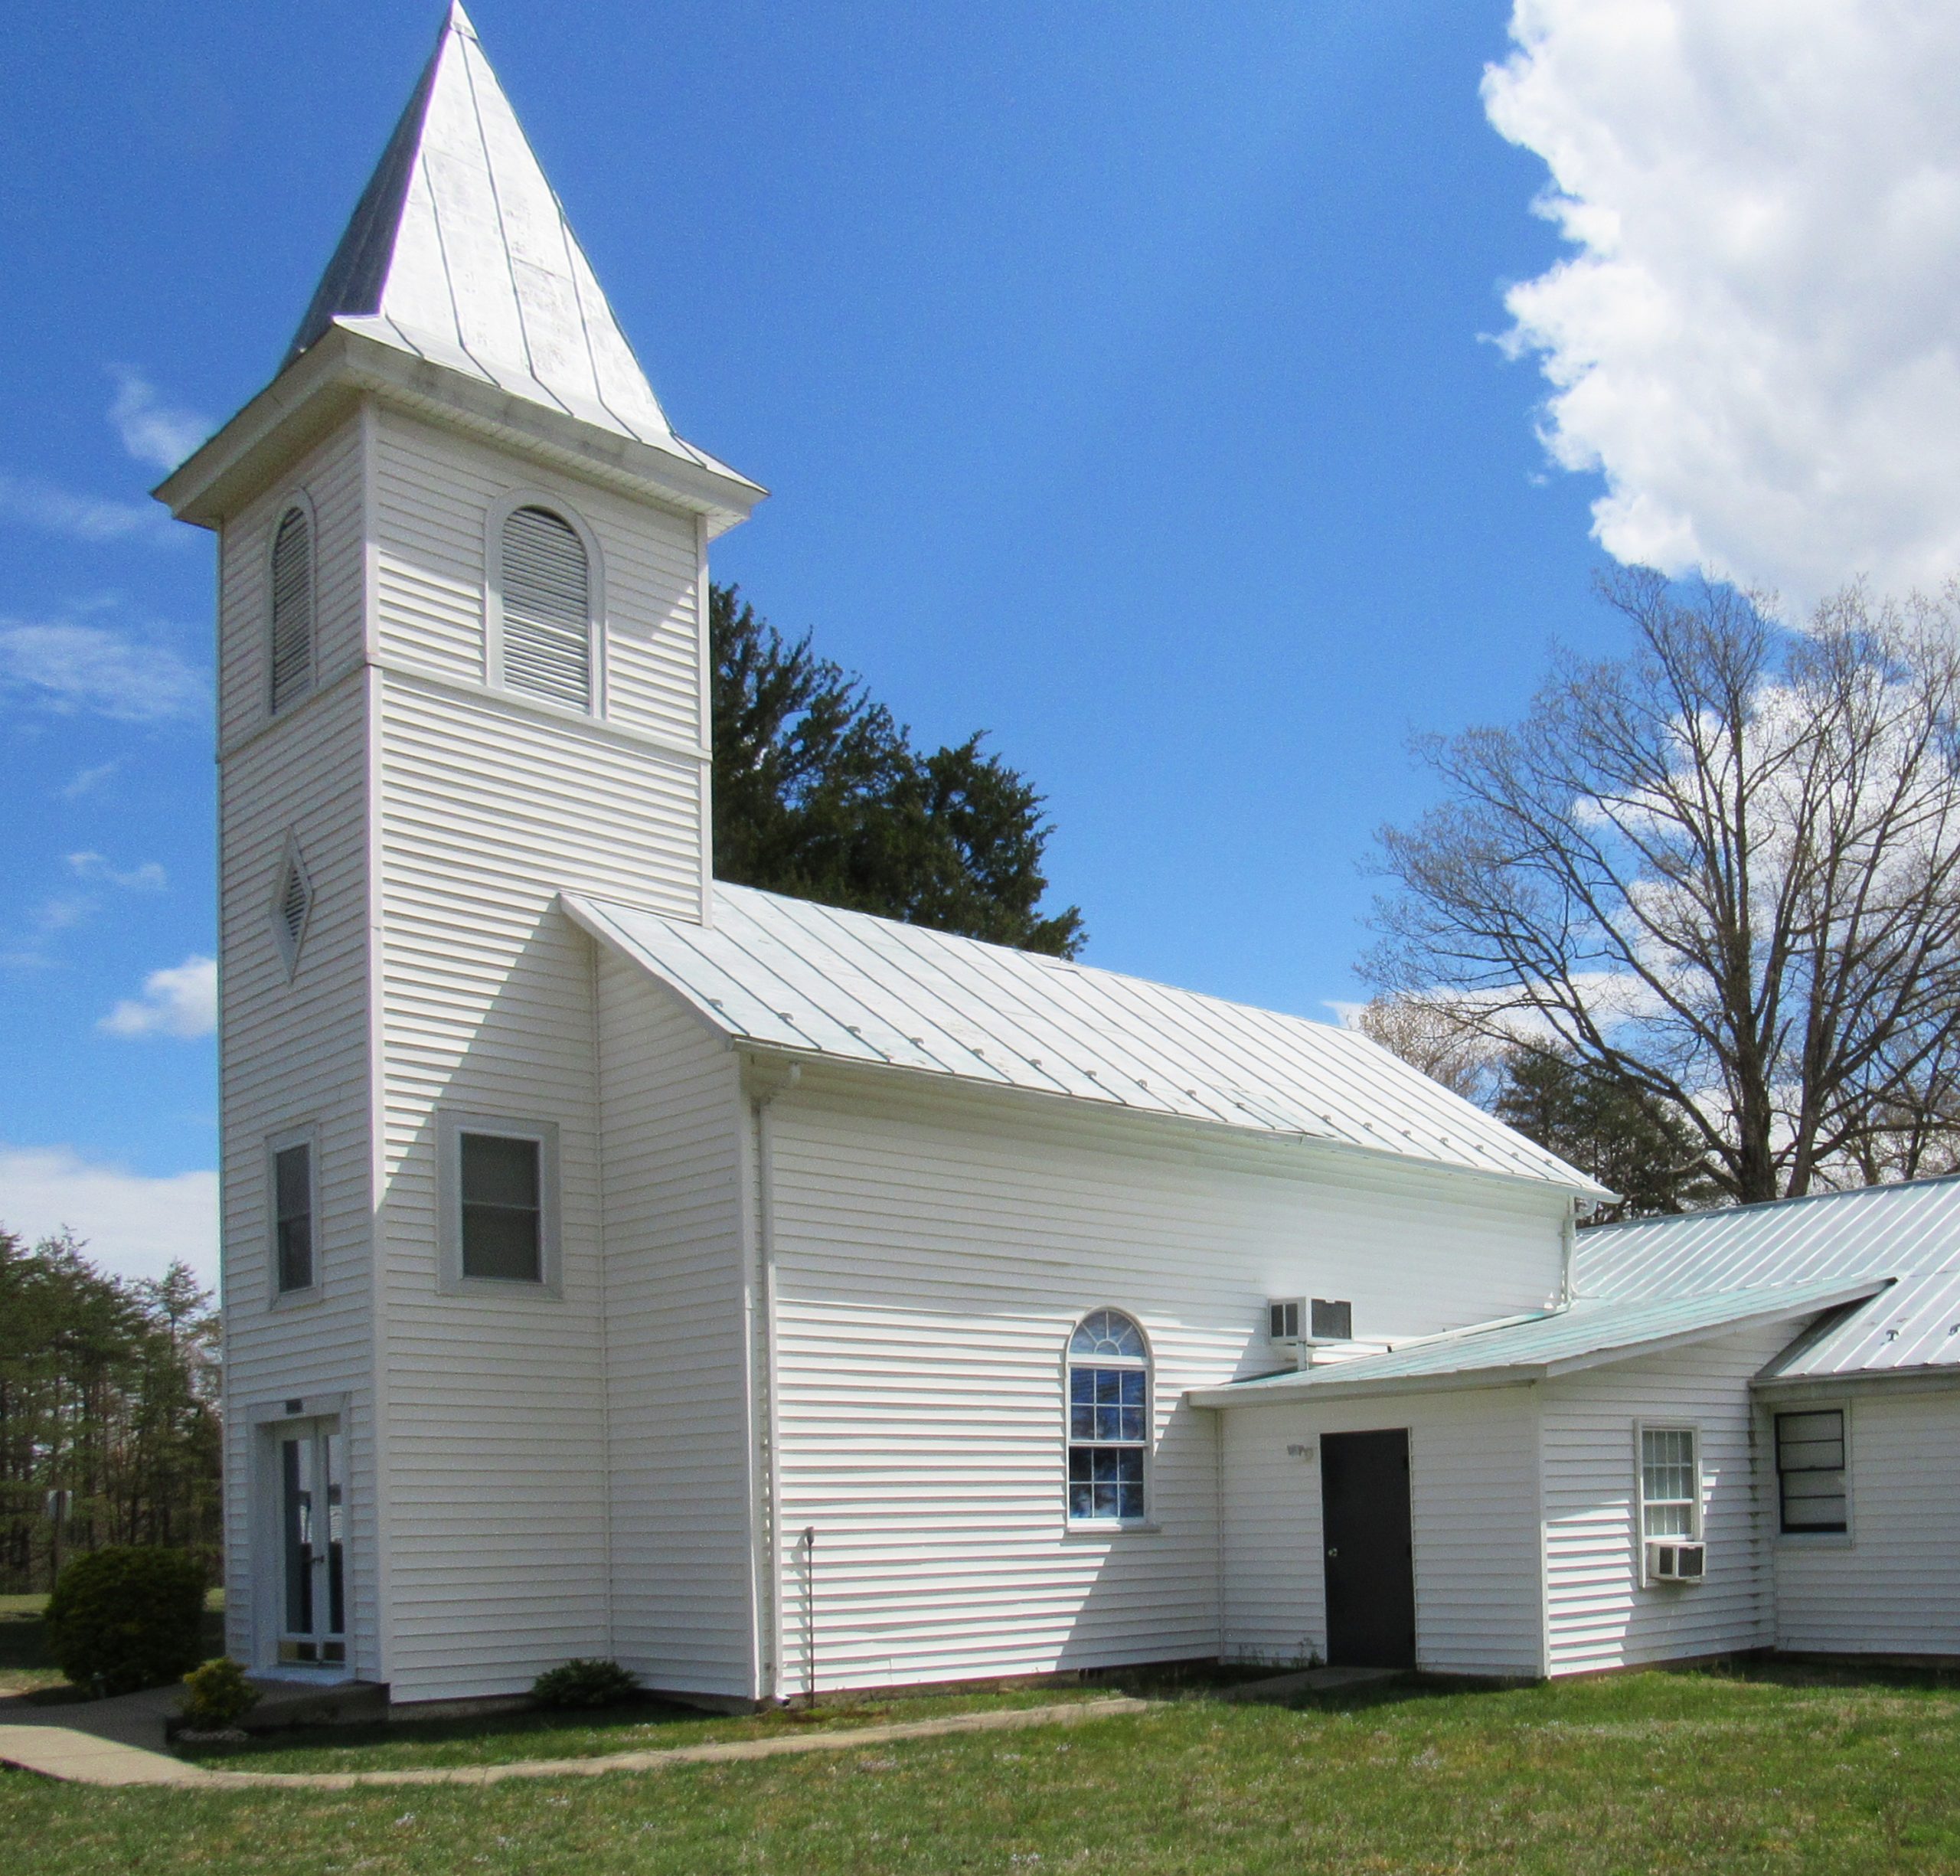 030-5932_AA_Resources_Fauquier_Co_MPD_2022_Silver_Hill_Baptist_Church_VLR_Online-scaled